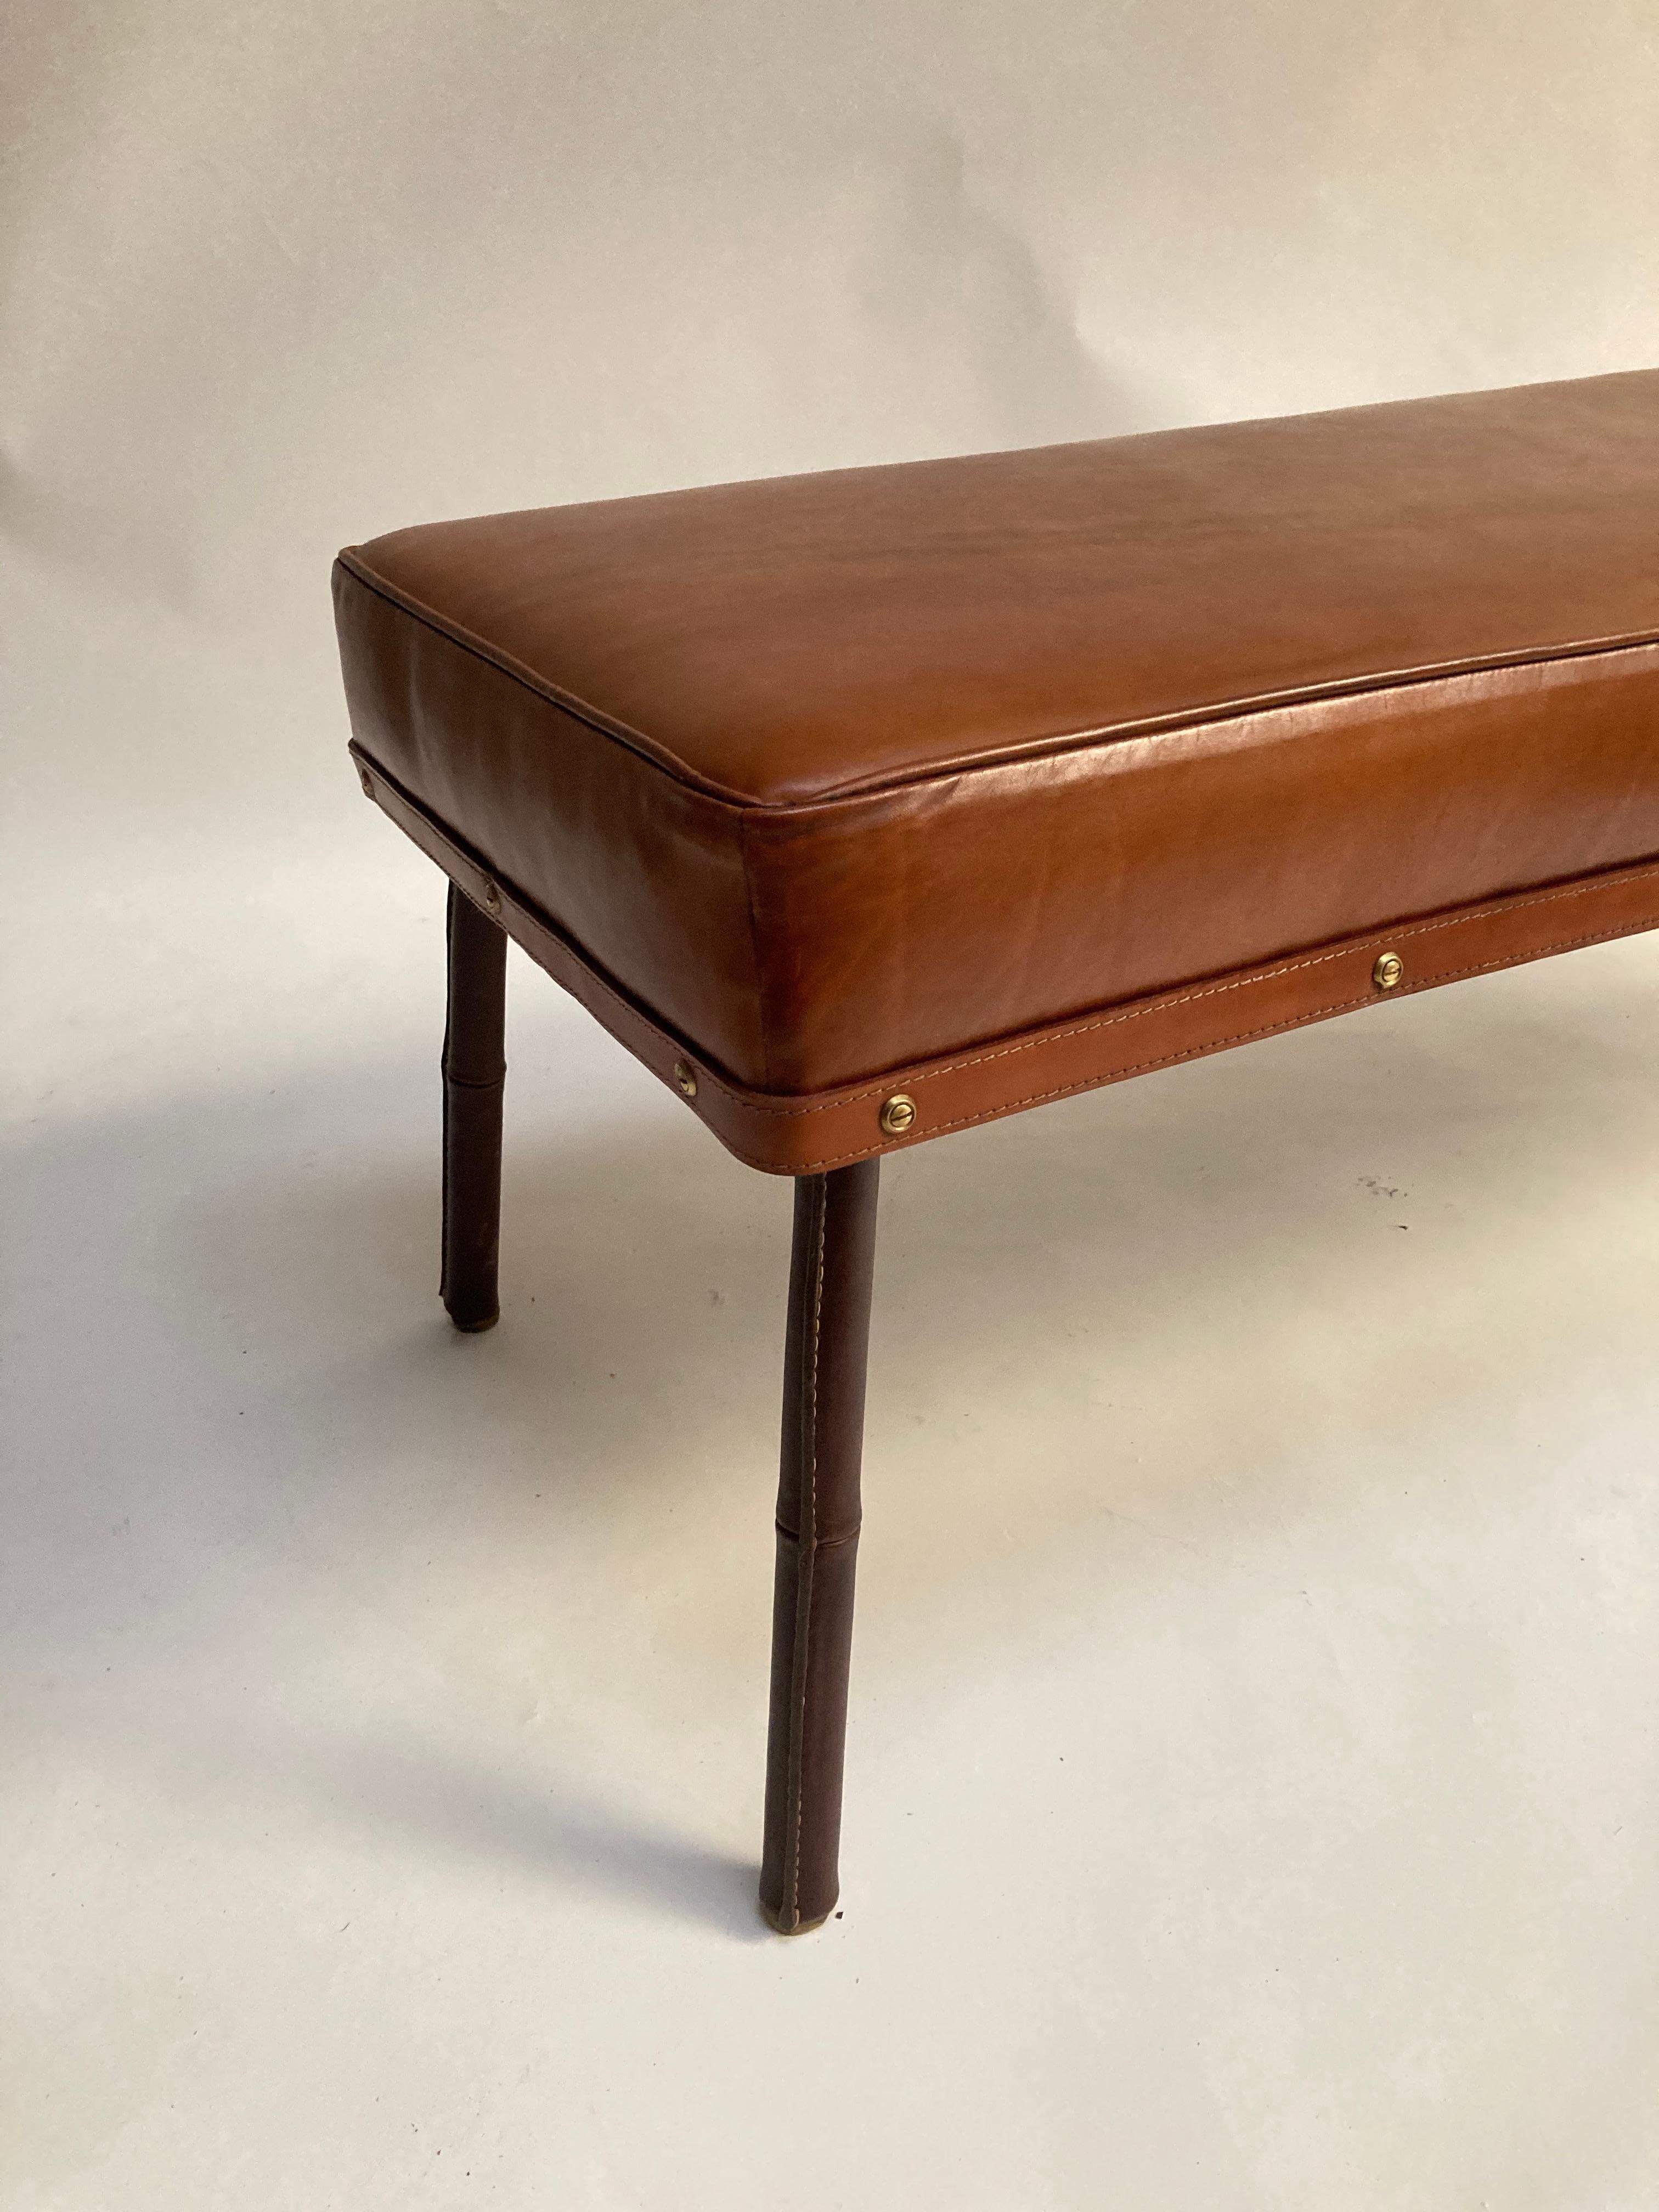 Very nice stitched leather bench by Jacques Adnet.
This piece is quiet rare.
France.
1950's.